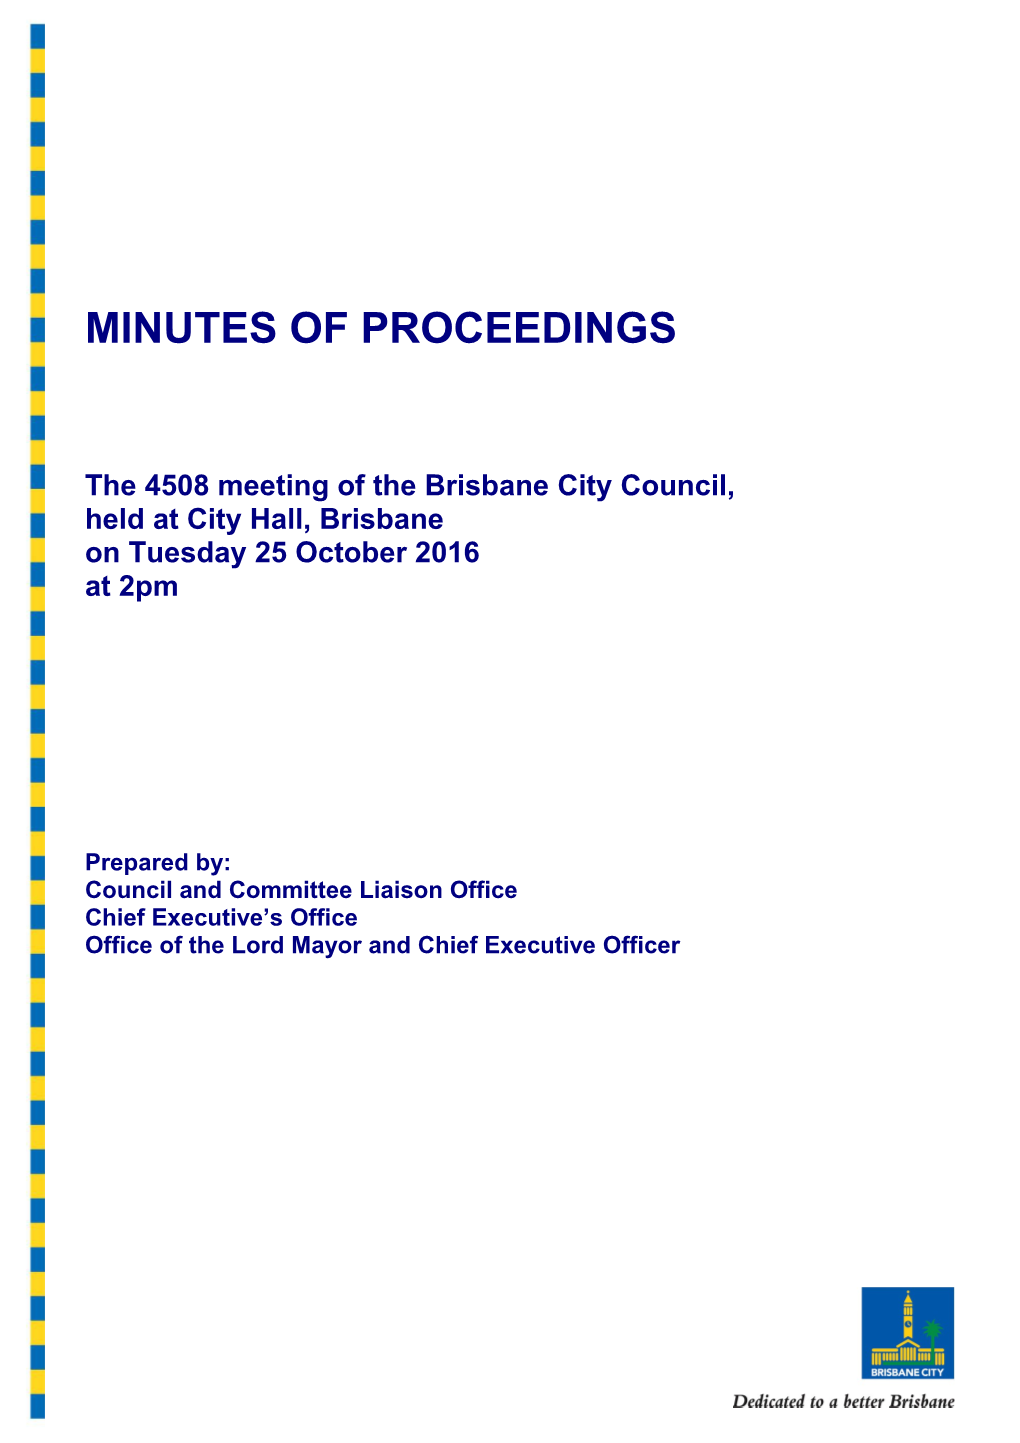 The 4508 Meeting of the Brisbane City Council